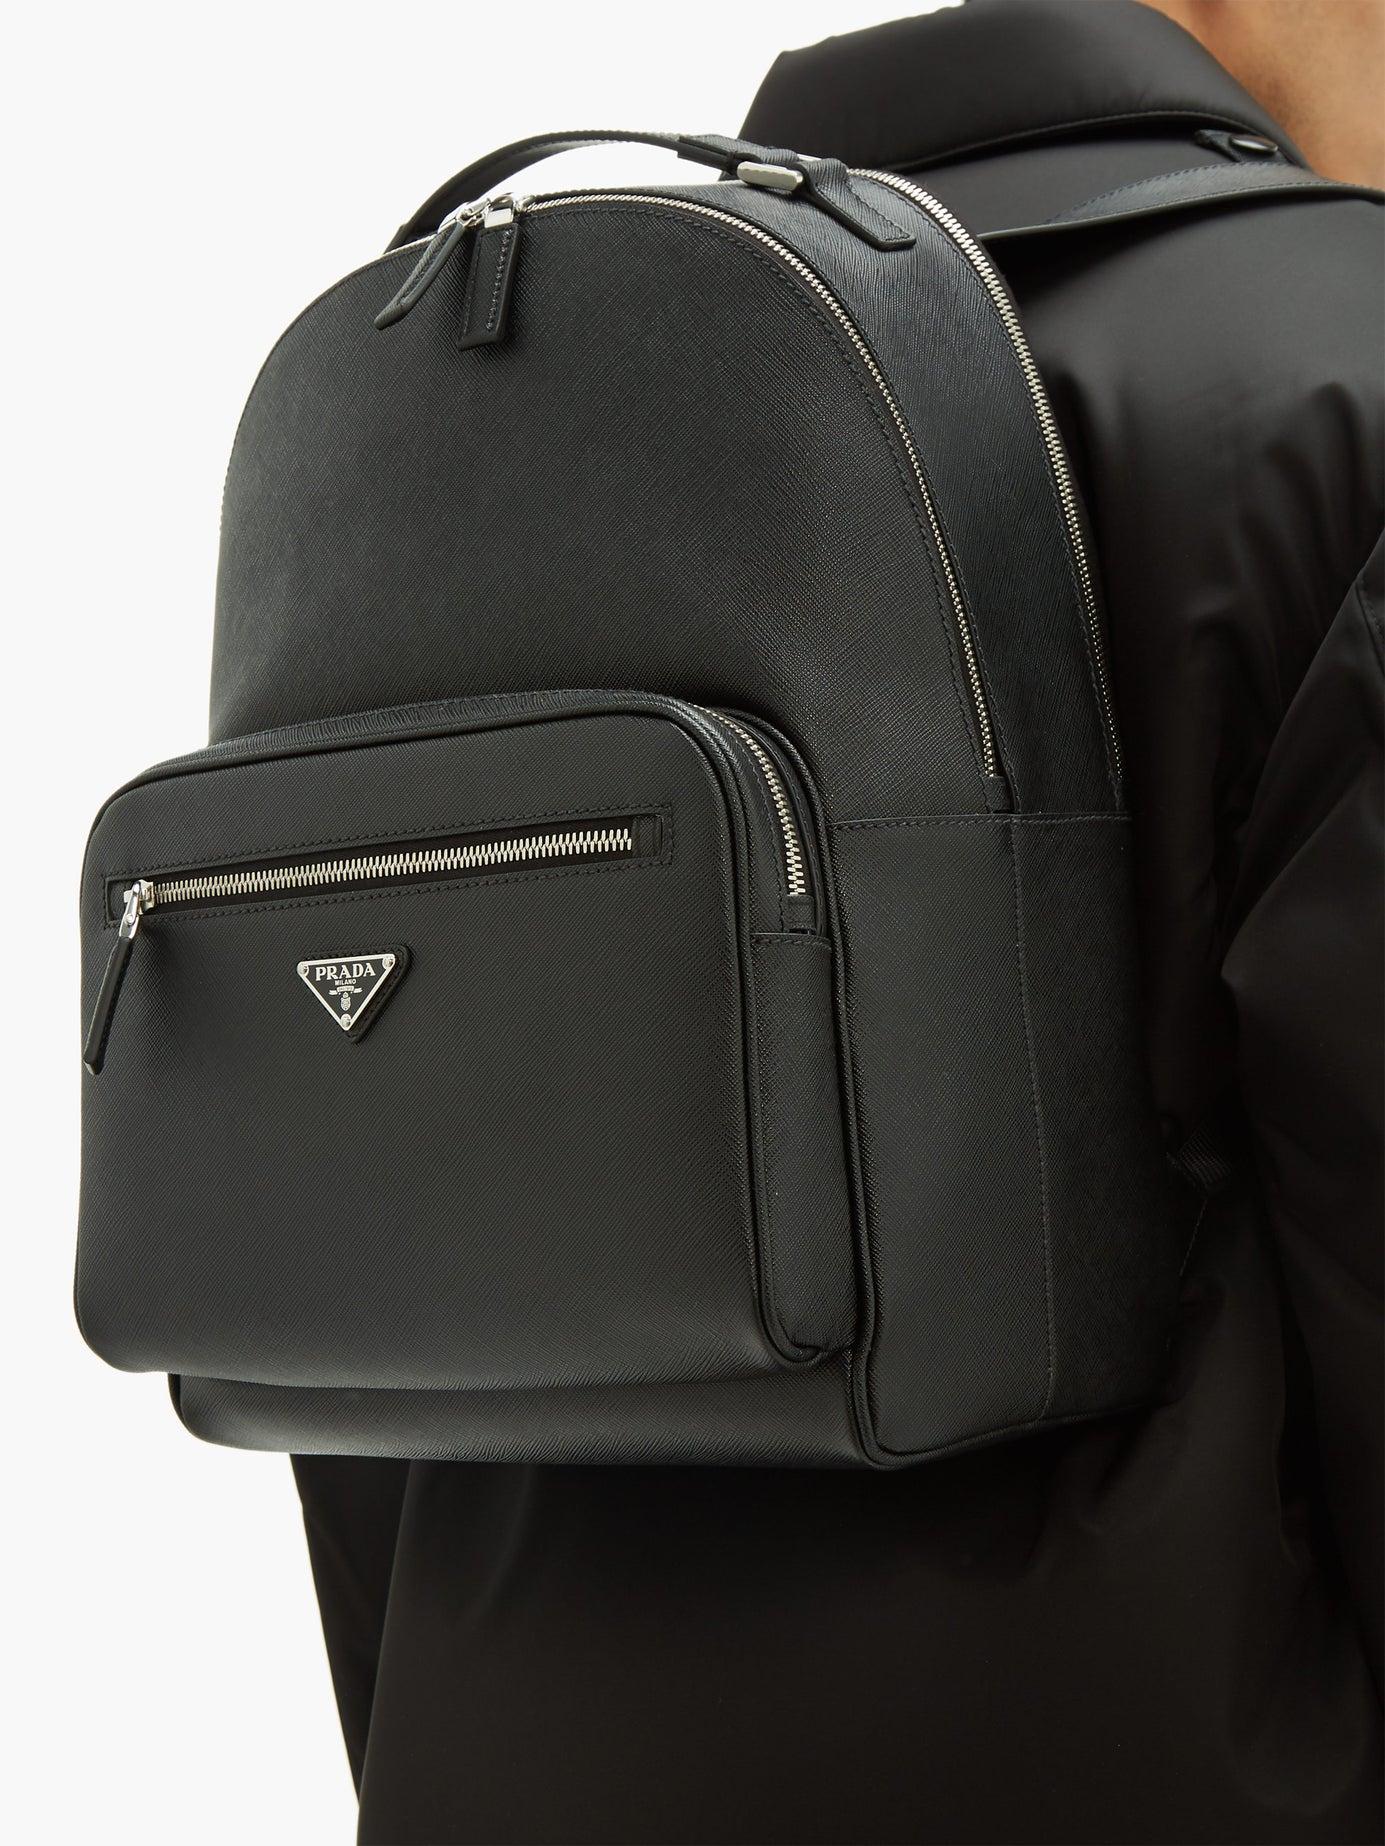 Prada Saffiano Leather Backpack in Black for Men | Lyst